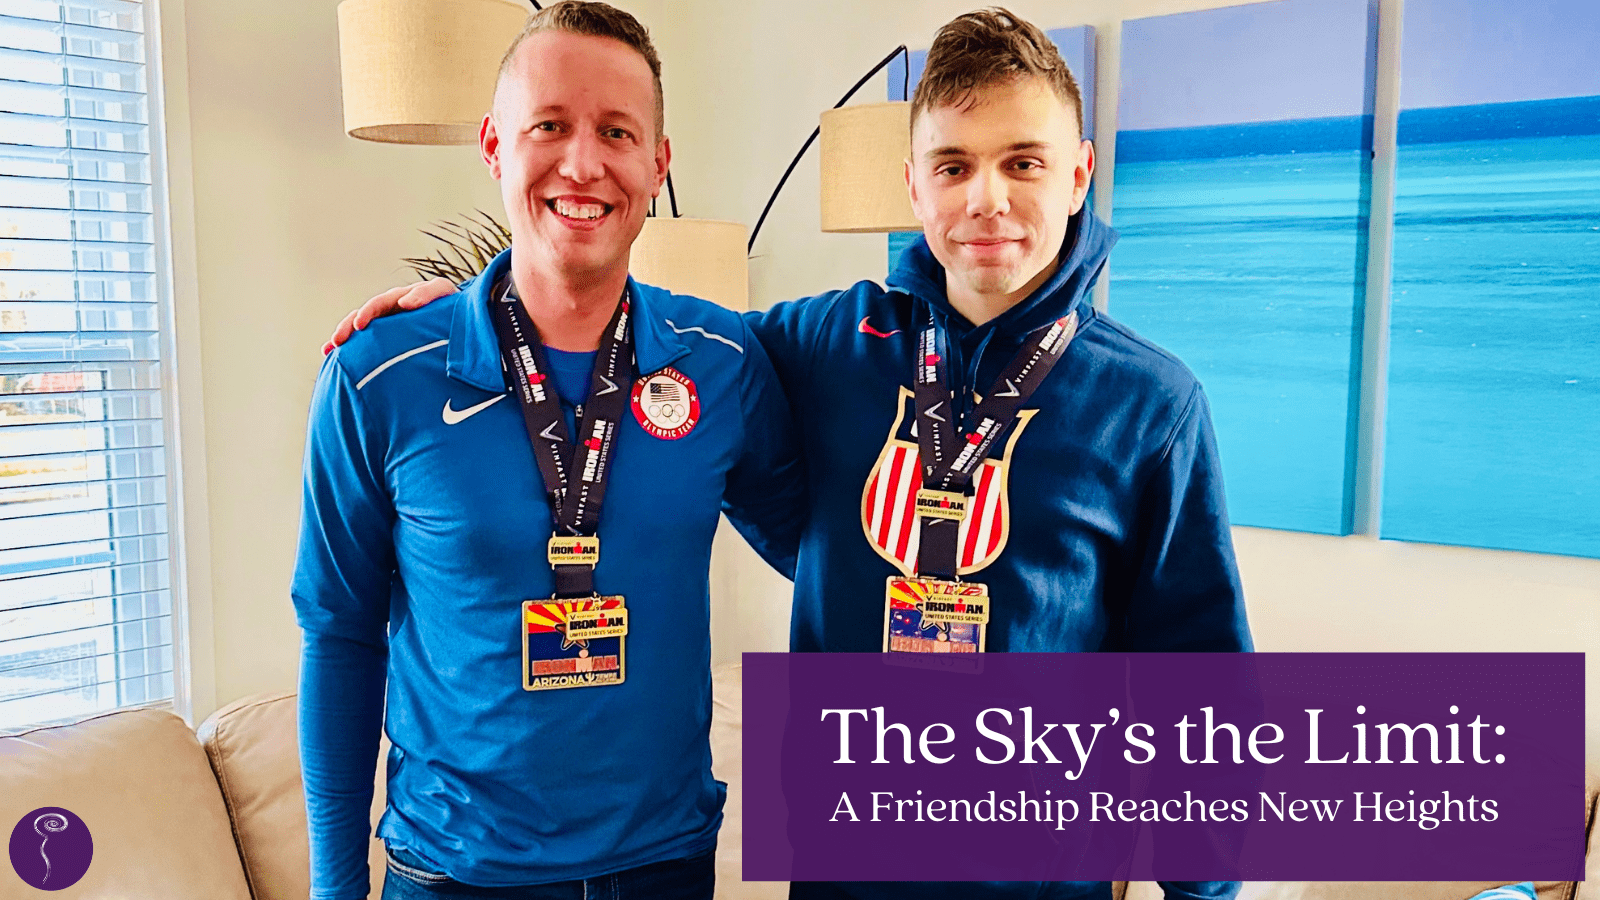 The Sky’s the Limit: A Friendship Reaches New Heights